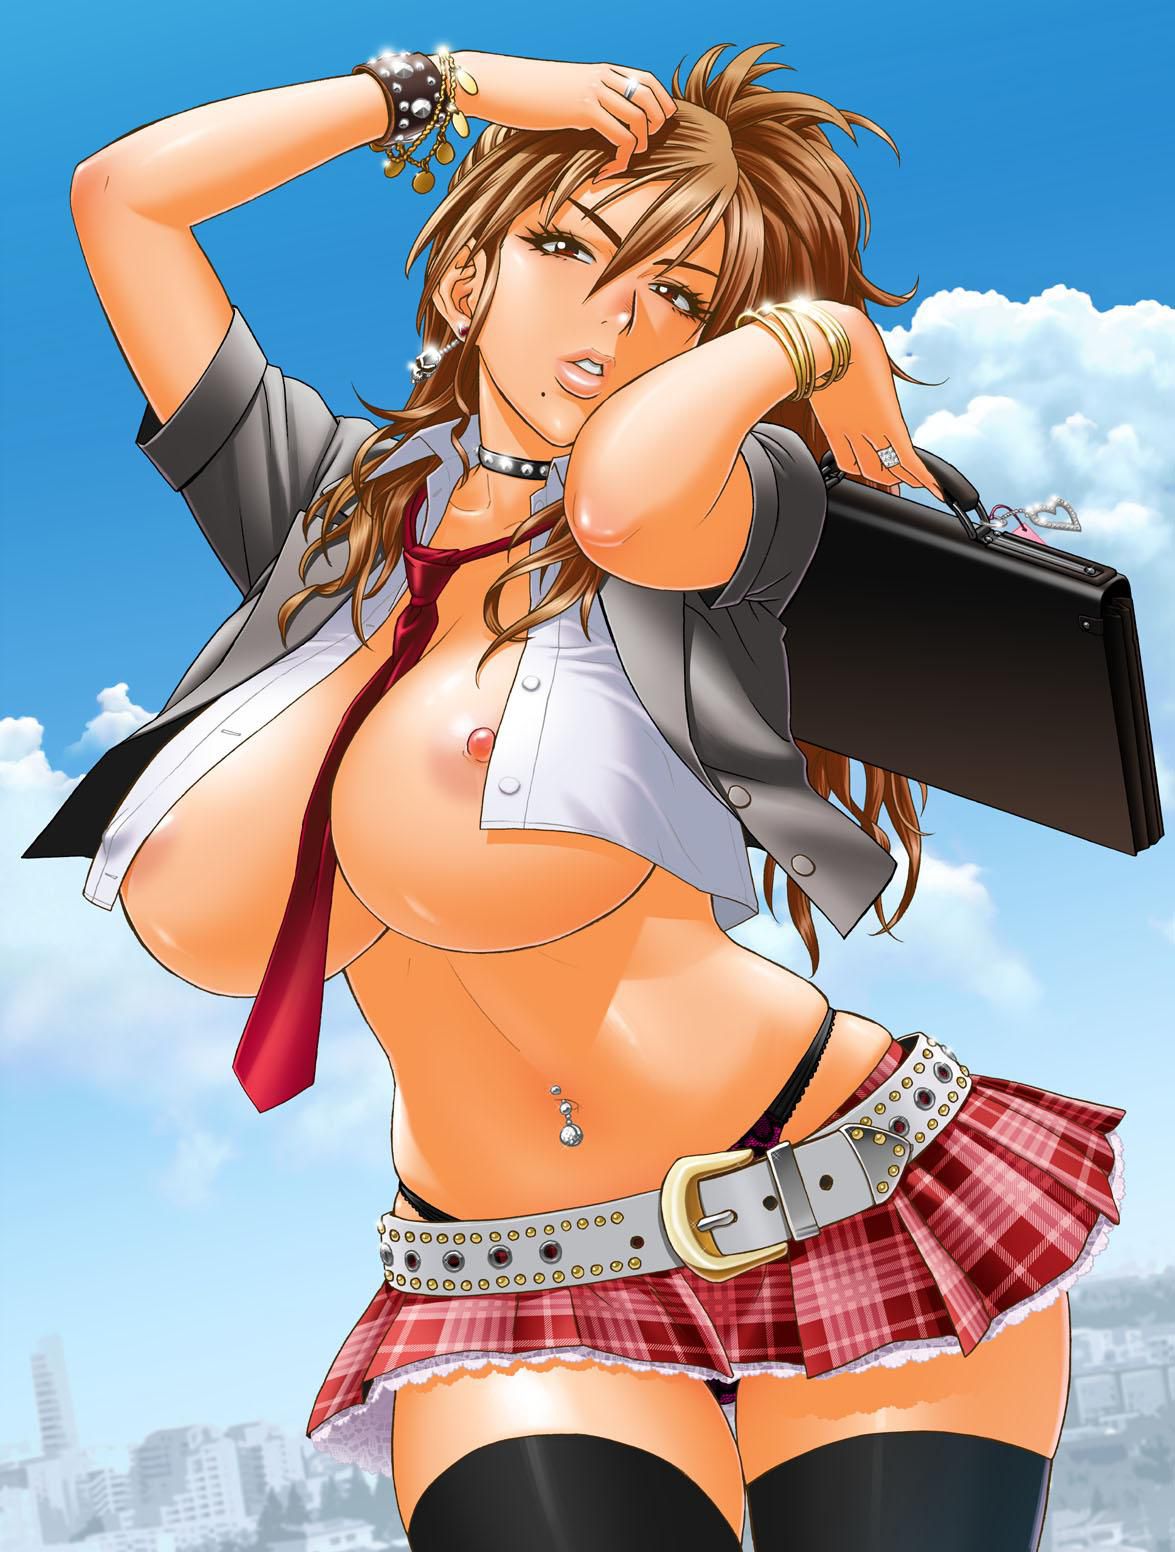 【Secondary erotic】 JK erotic image where you can enjoy the figure of a high school girl in uniform is here 6